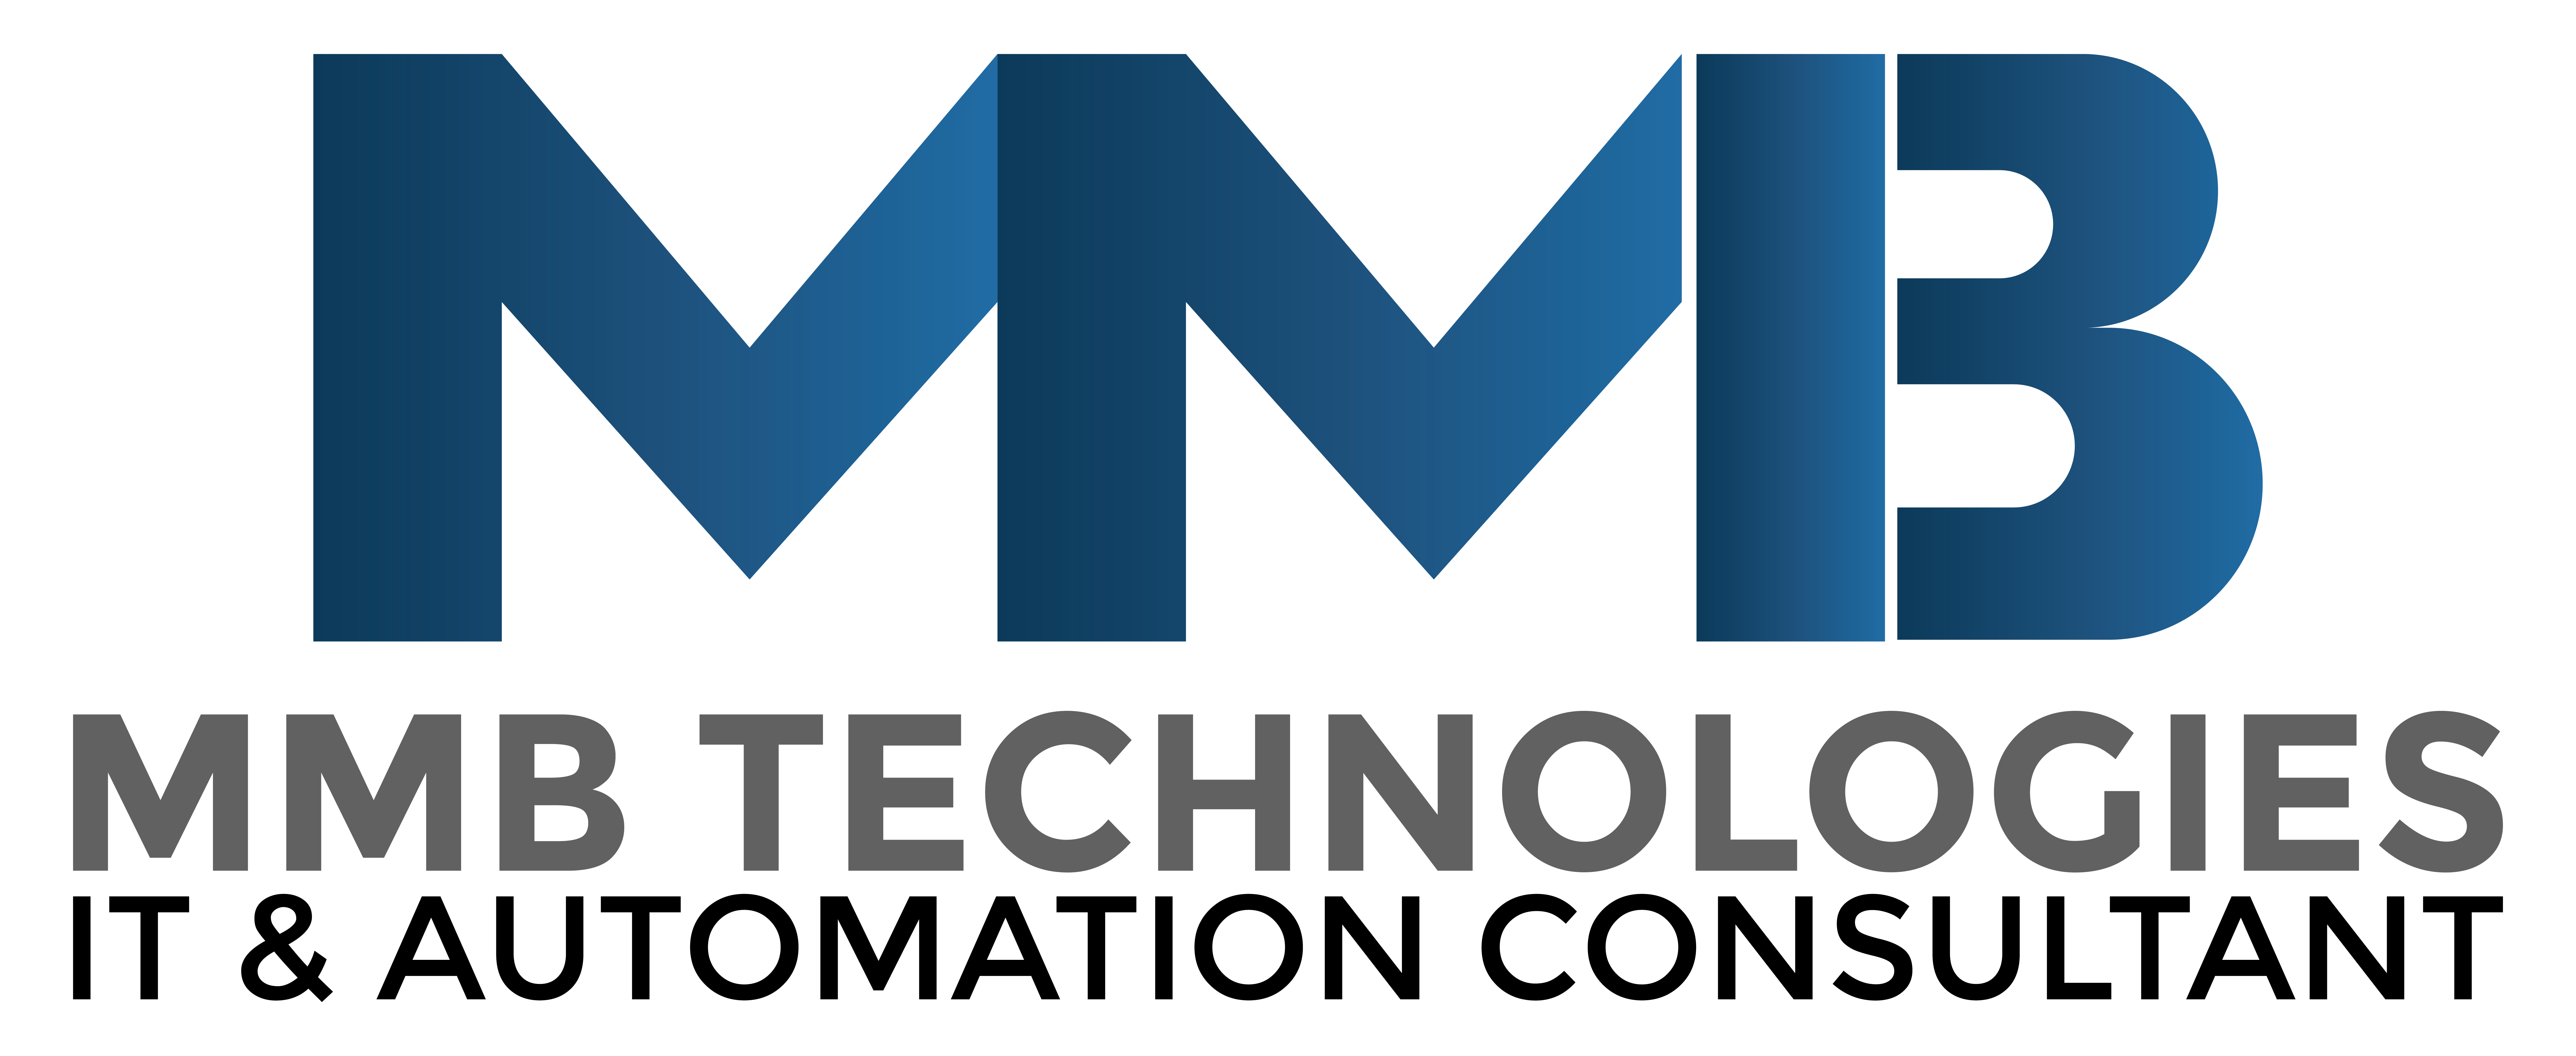 MMB TECHNOLOGIES | IT & AUTOMATION CONSULTANT